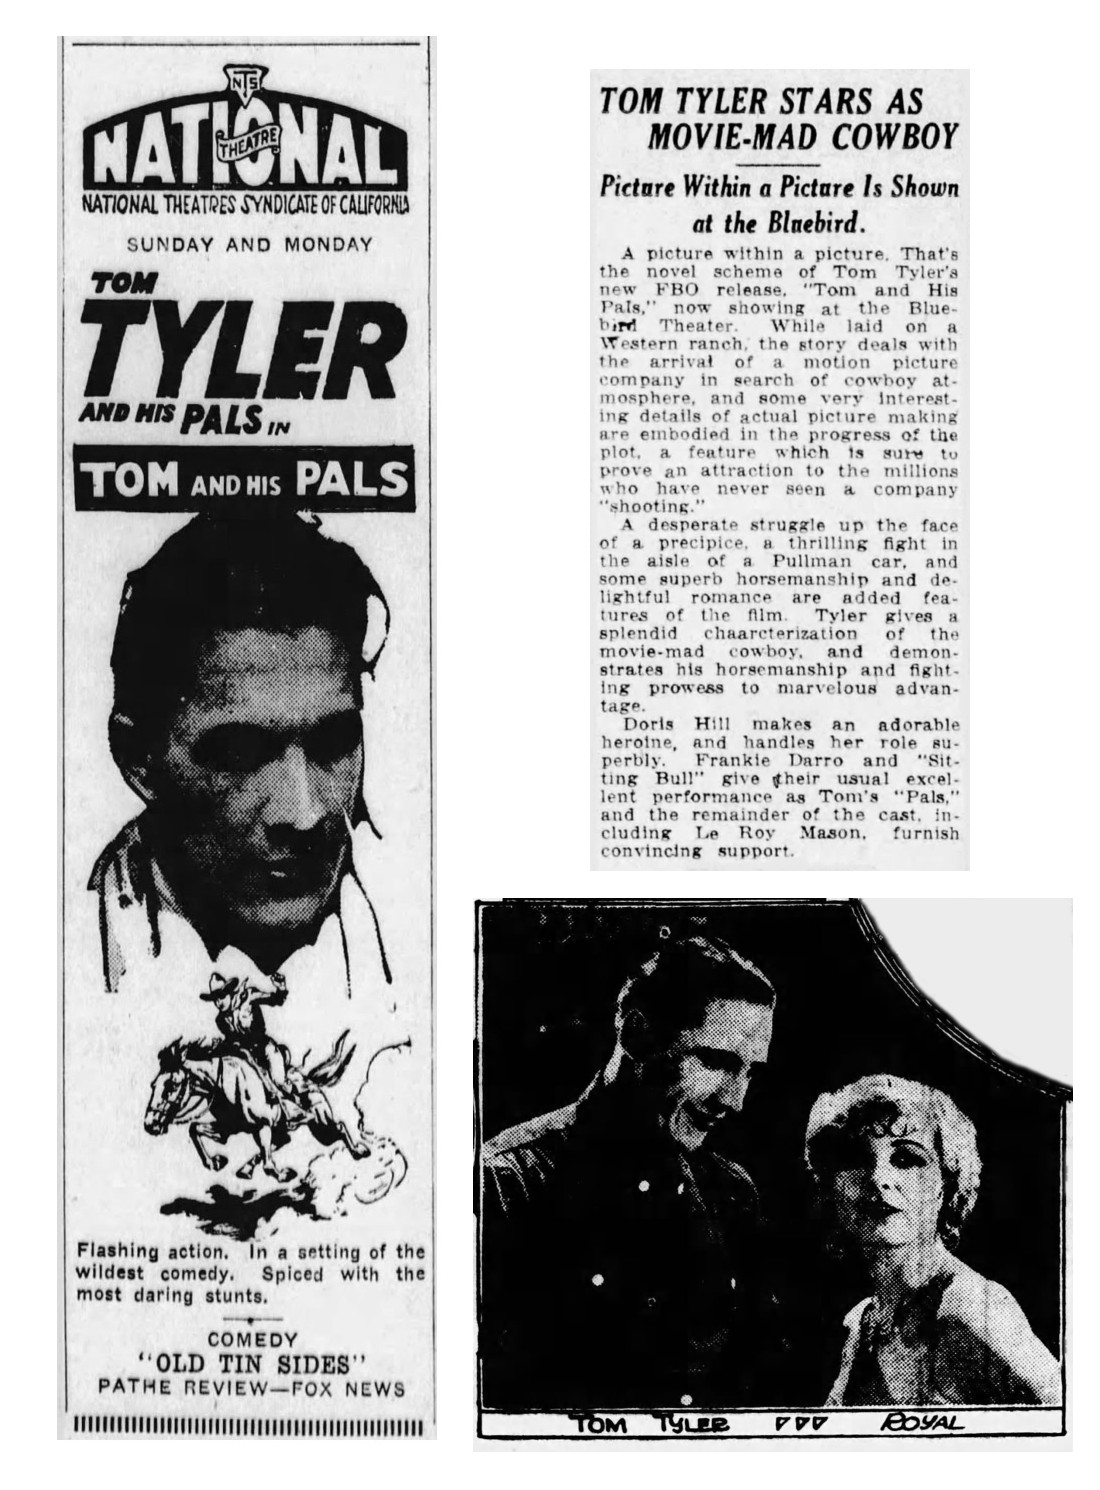 Tom and His Pals film reviews cinema ads synopses